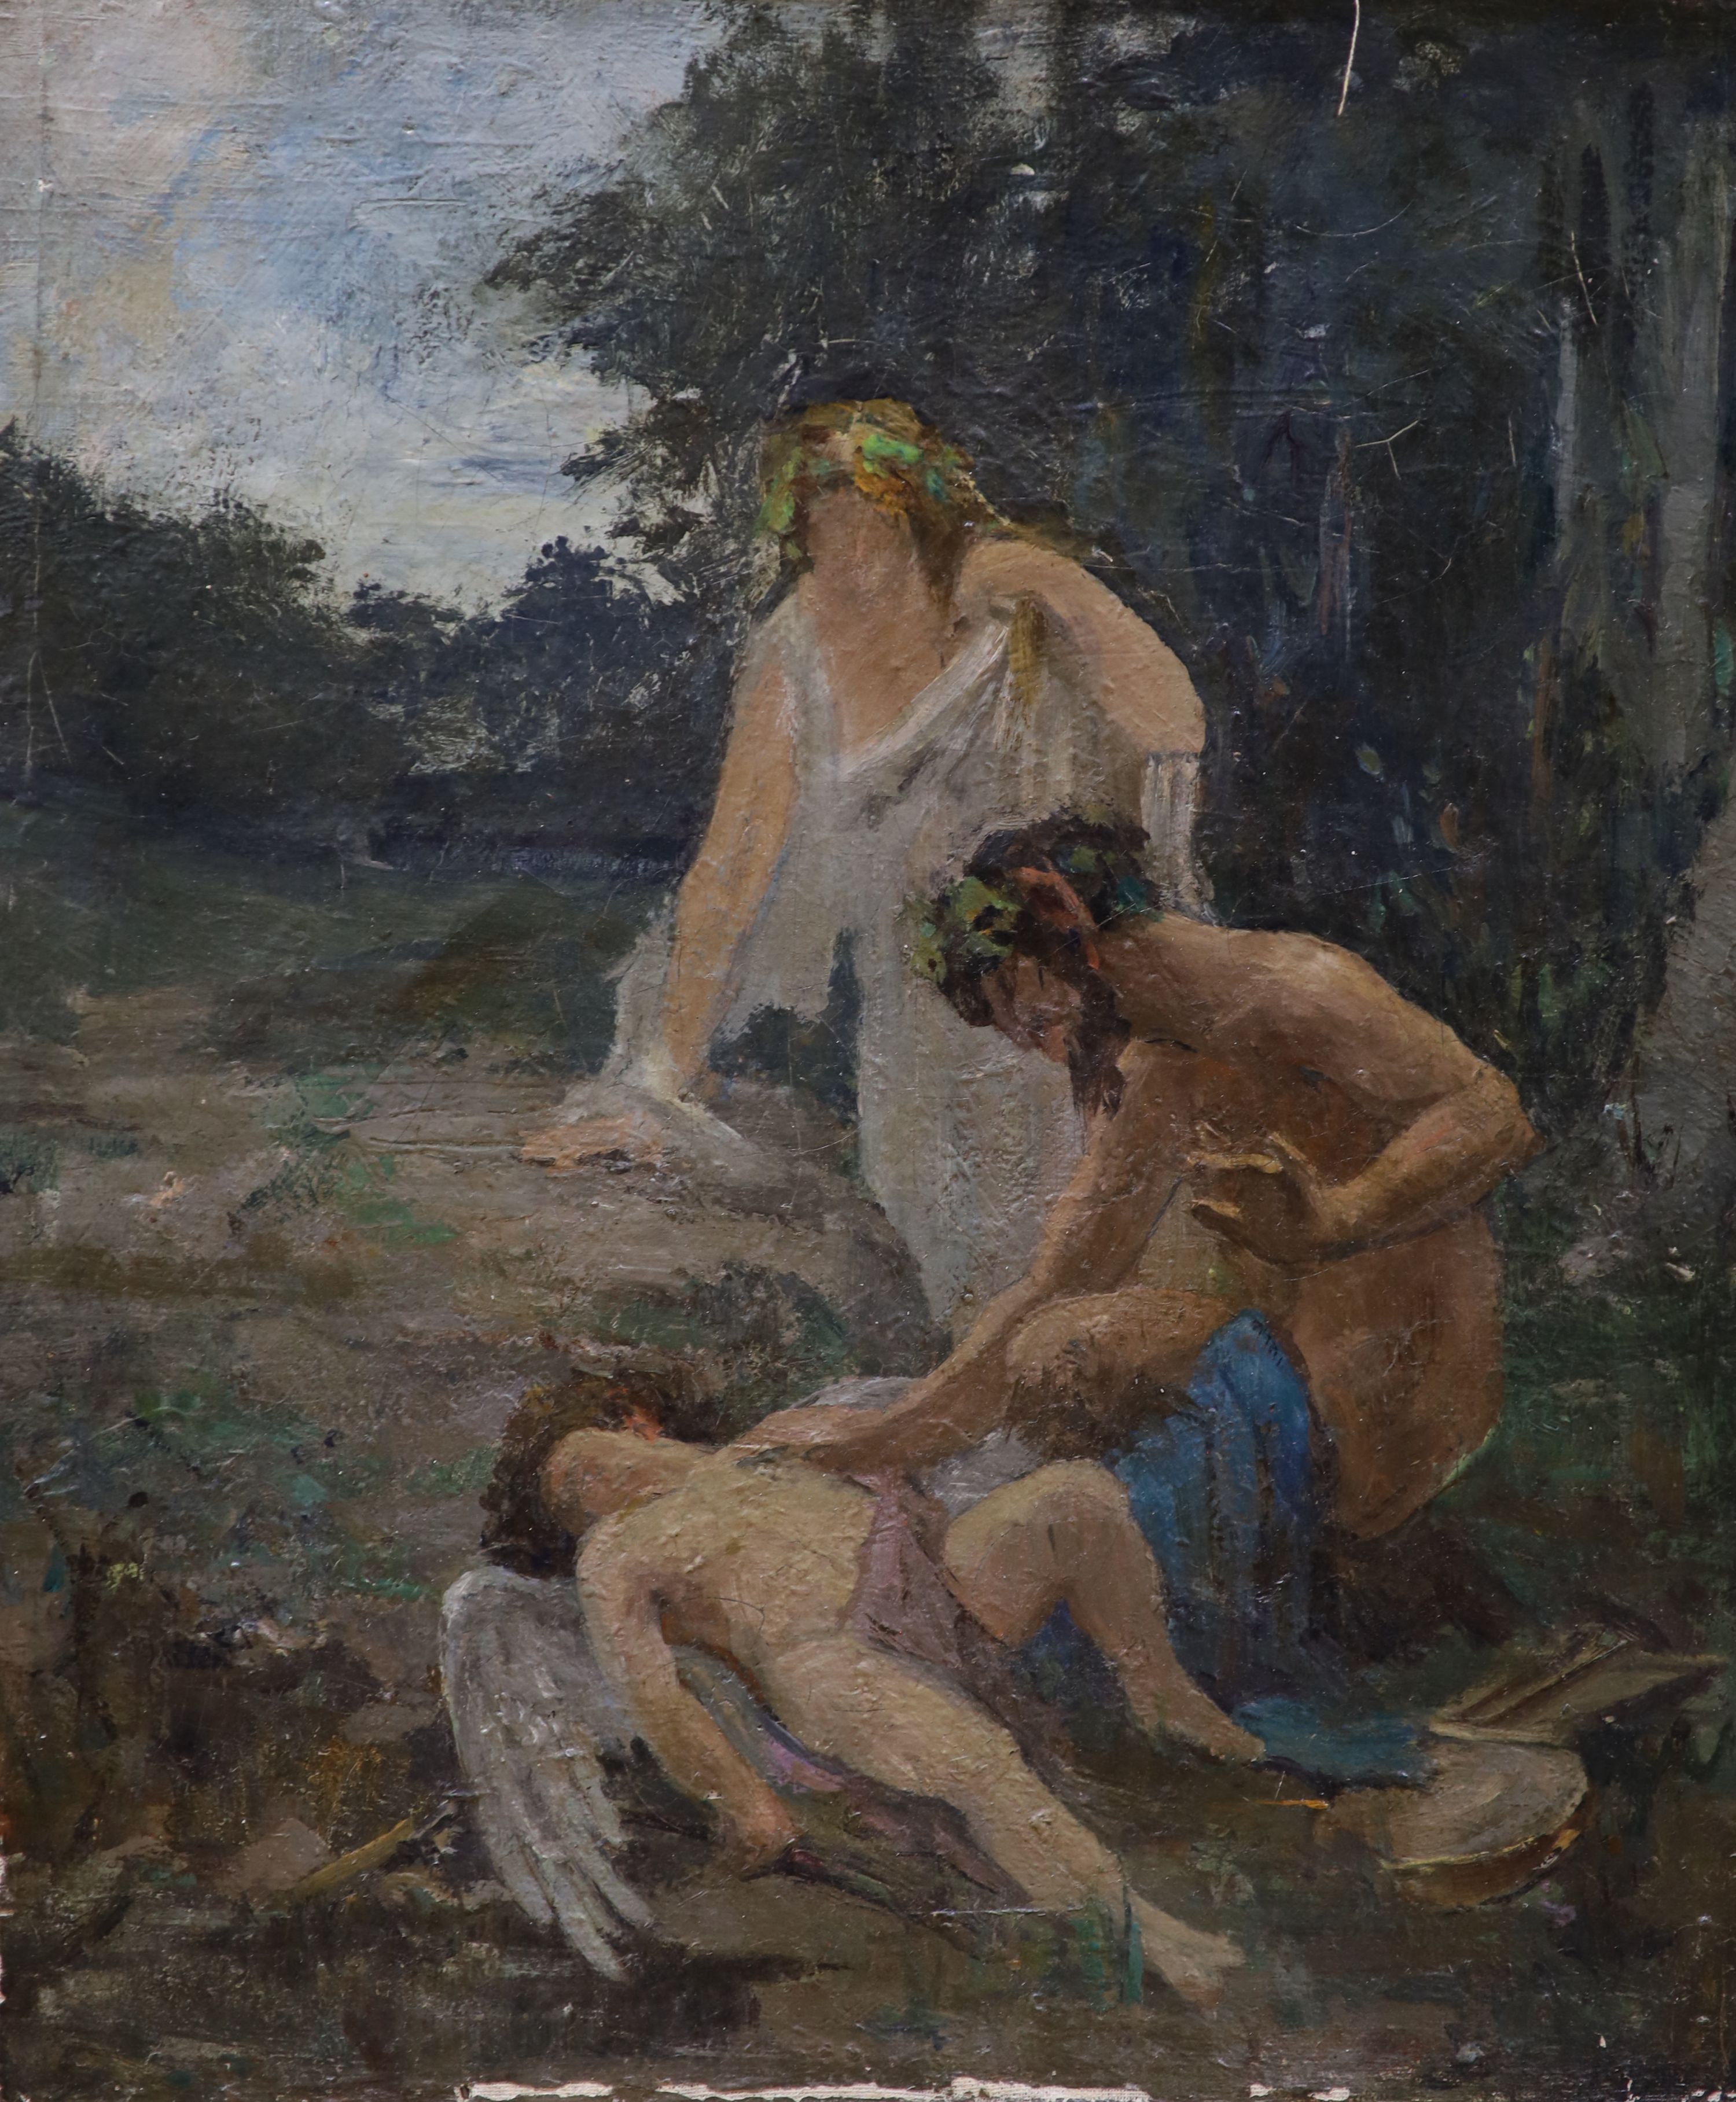 19th Century Continental School, study of classical figures attending a fallen or slumbering putto, oil on canvas, unframed, signed to frame verso, 47 x 40cm.